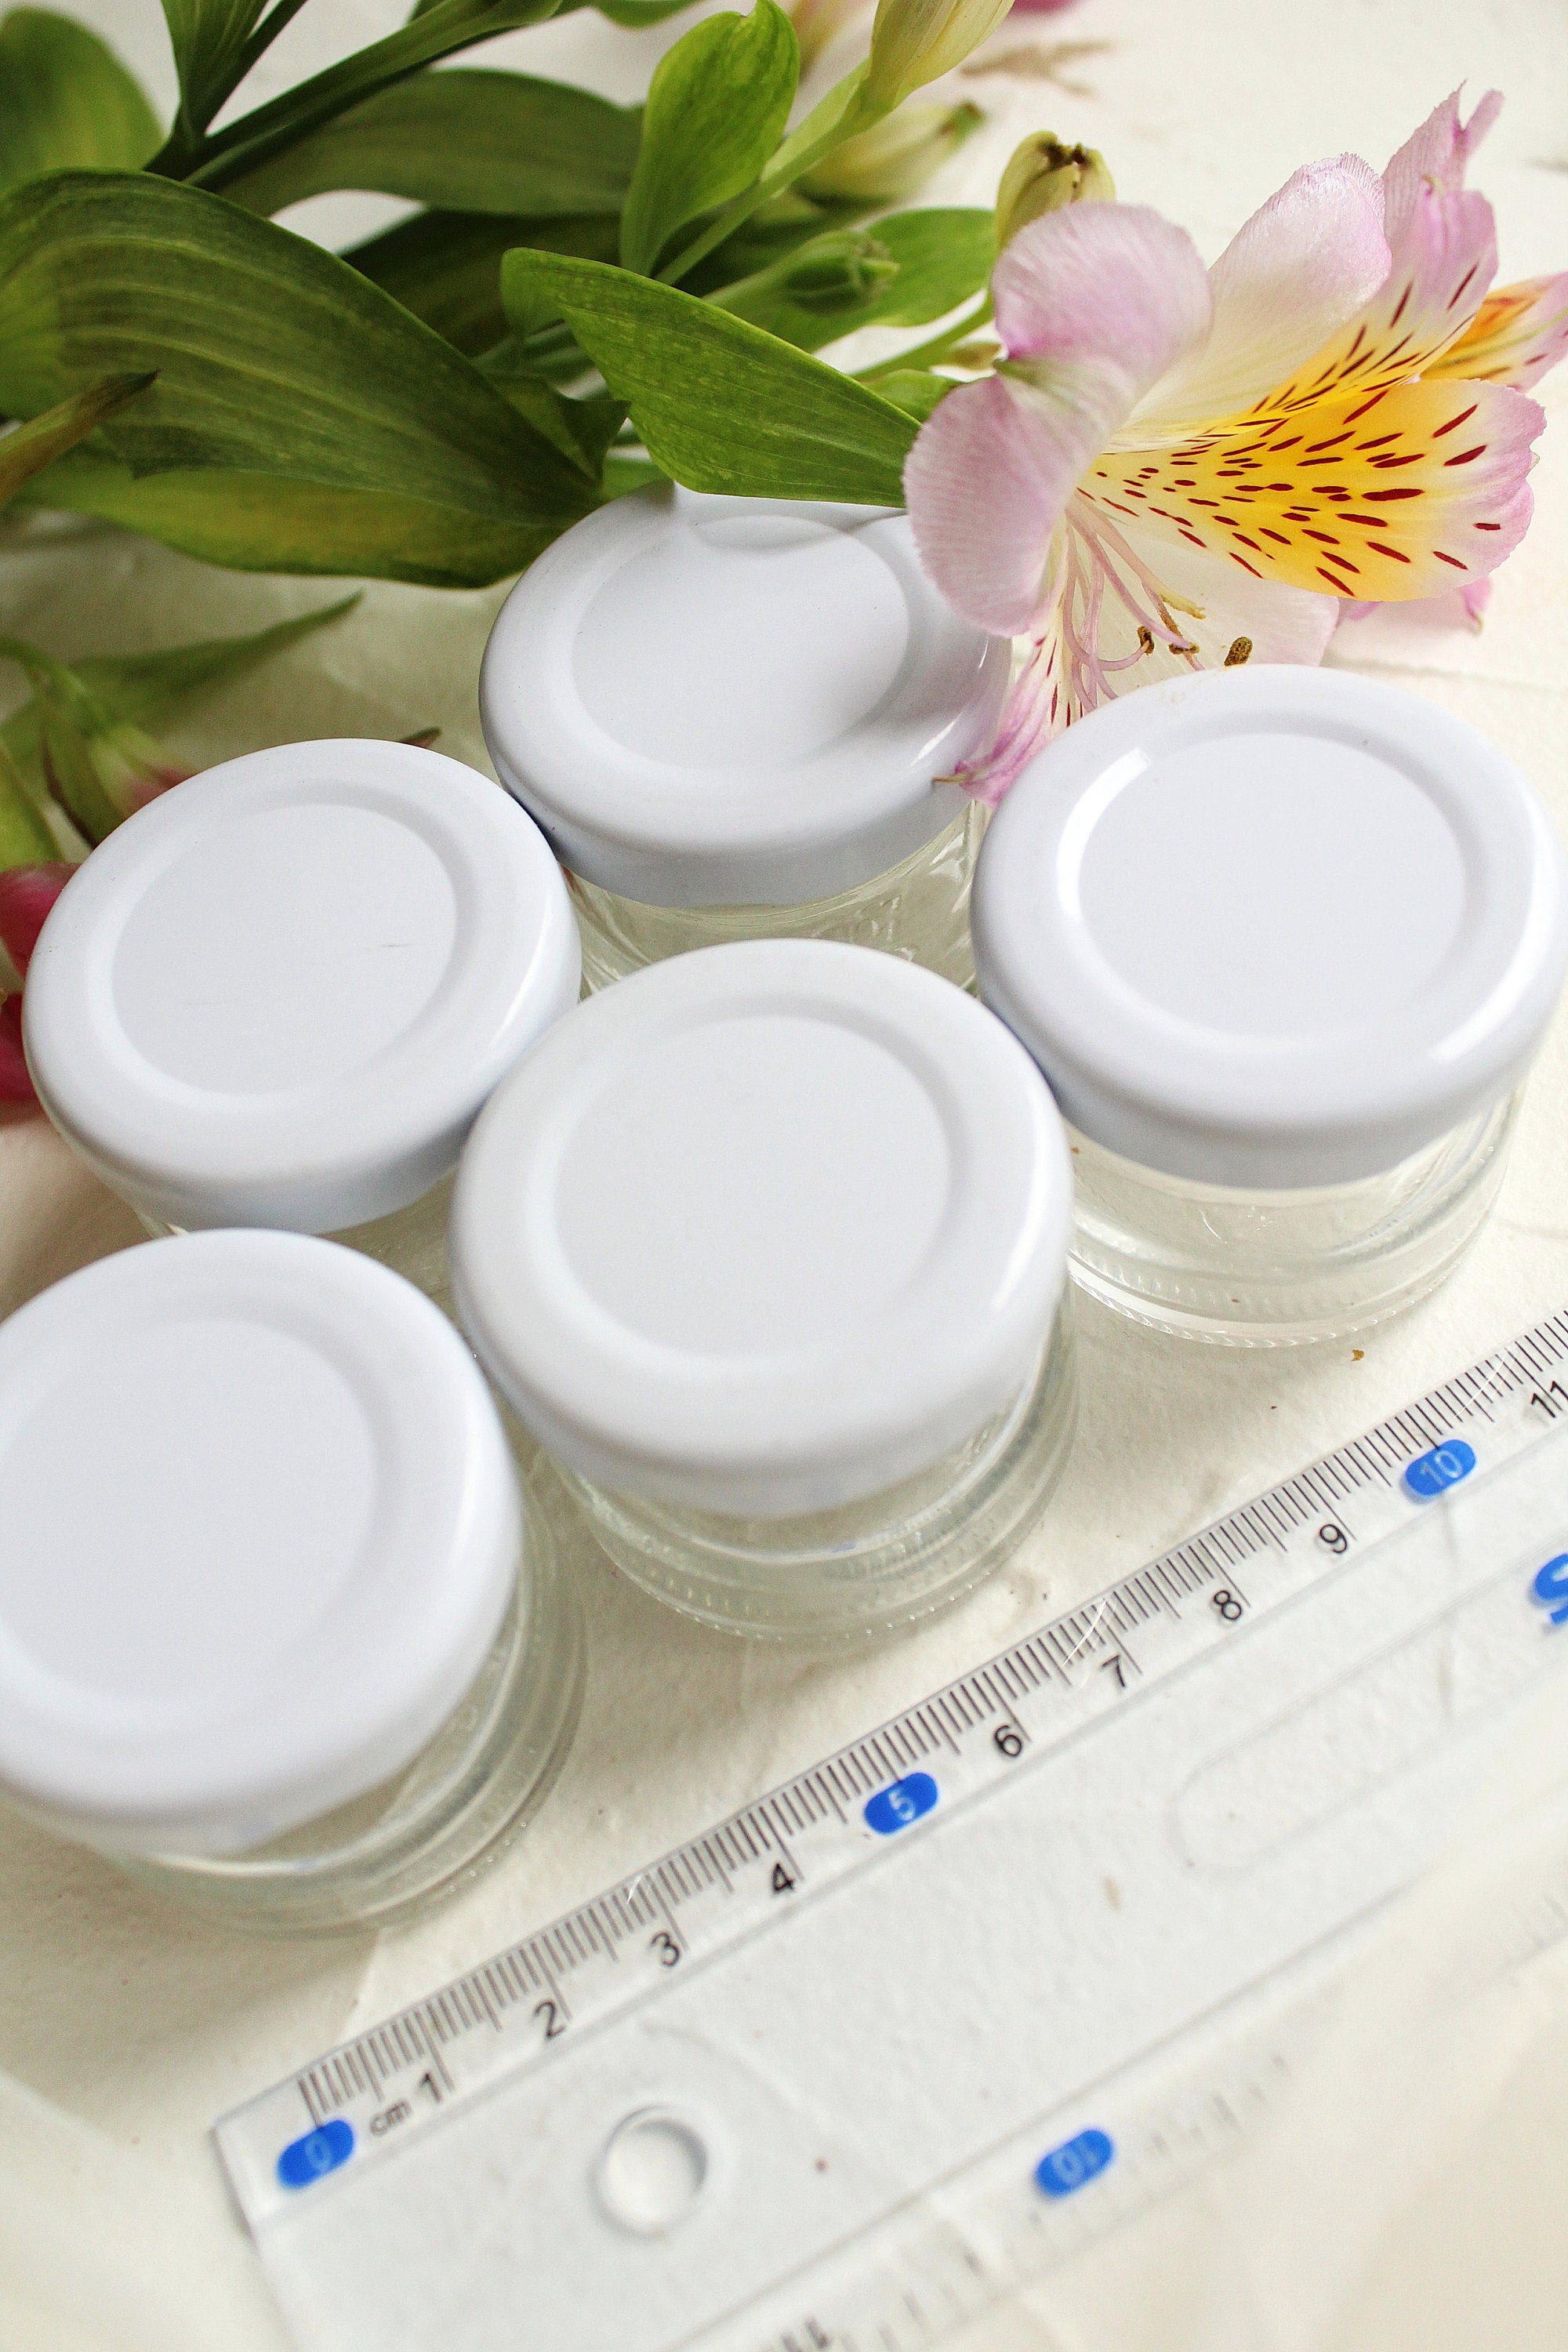 6 pcs of 1 oz (30ml) Small Glass Jars, Colorful Lids, Free of BPA, Plastisol Lined, Food Grade